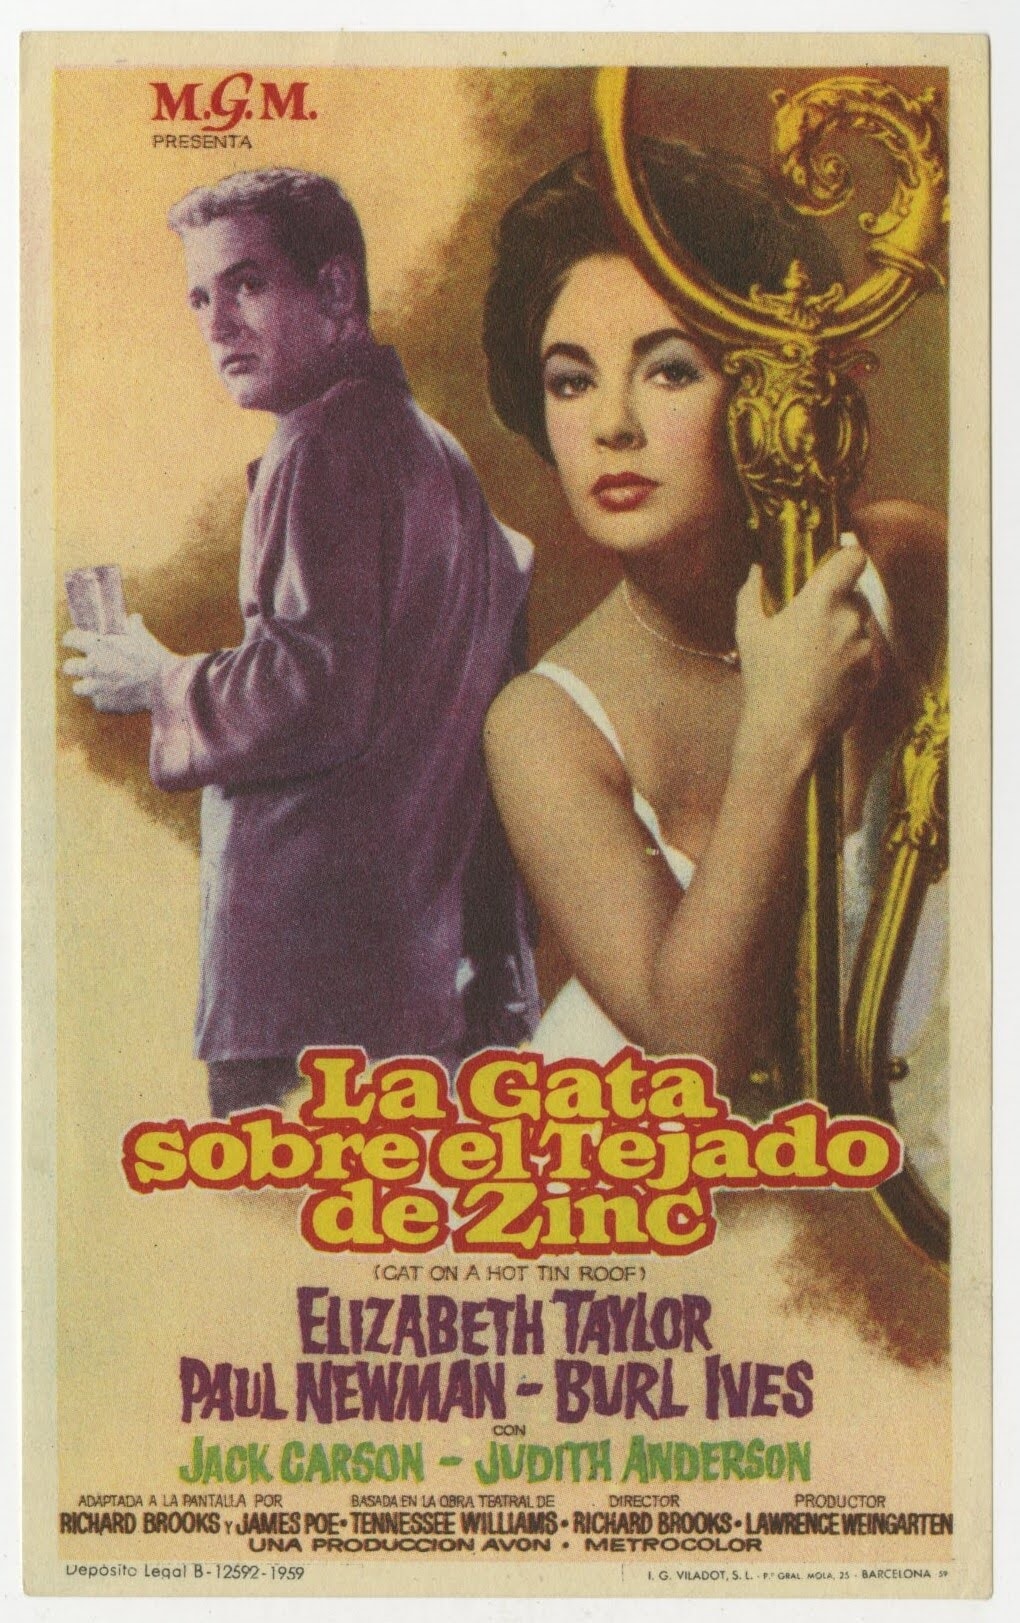 Cat On A Hot Tin Roof Spanish Herald (R 1959) - posterpalace.com